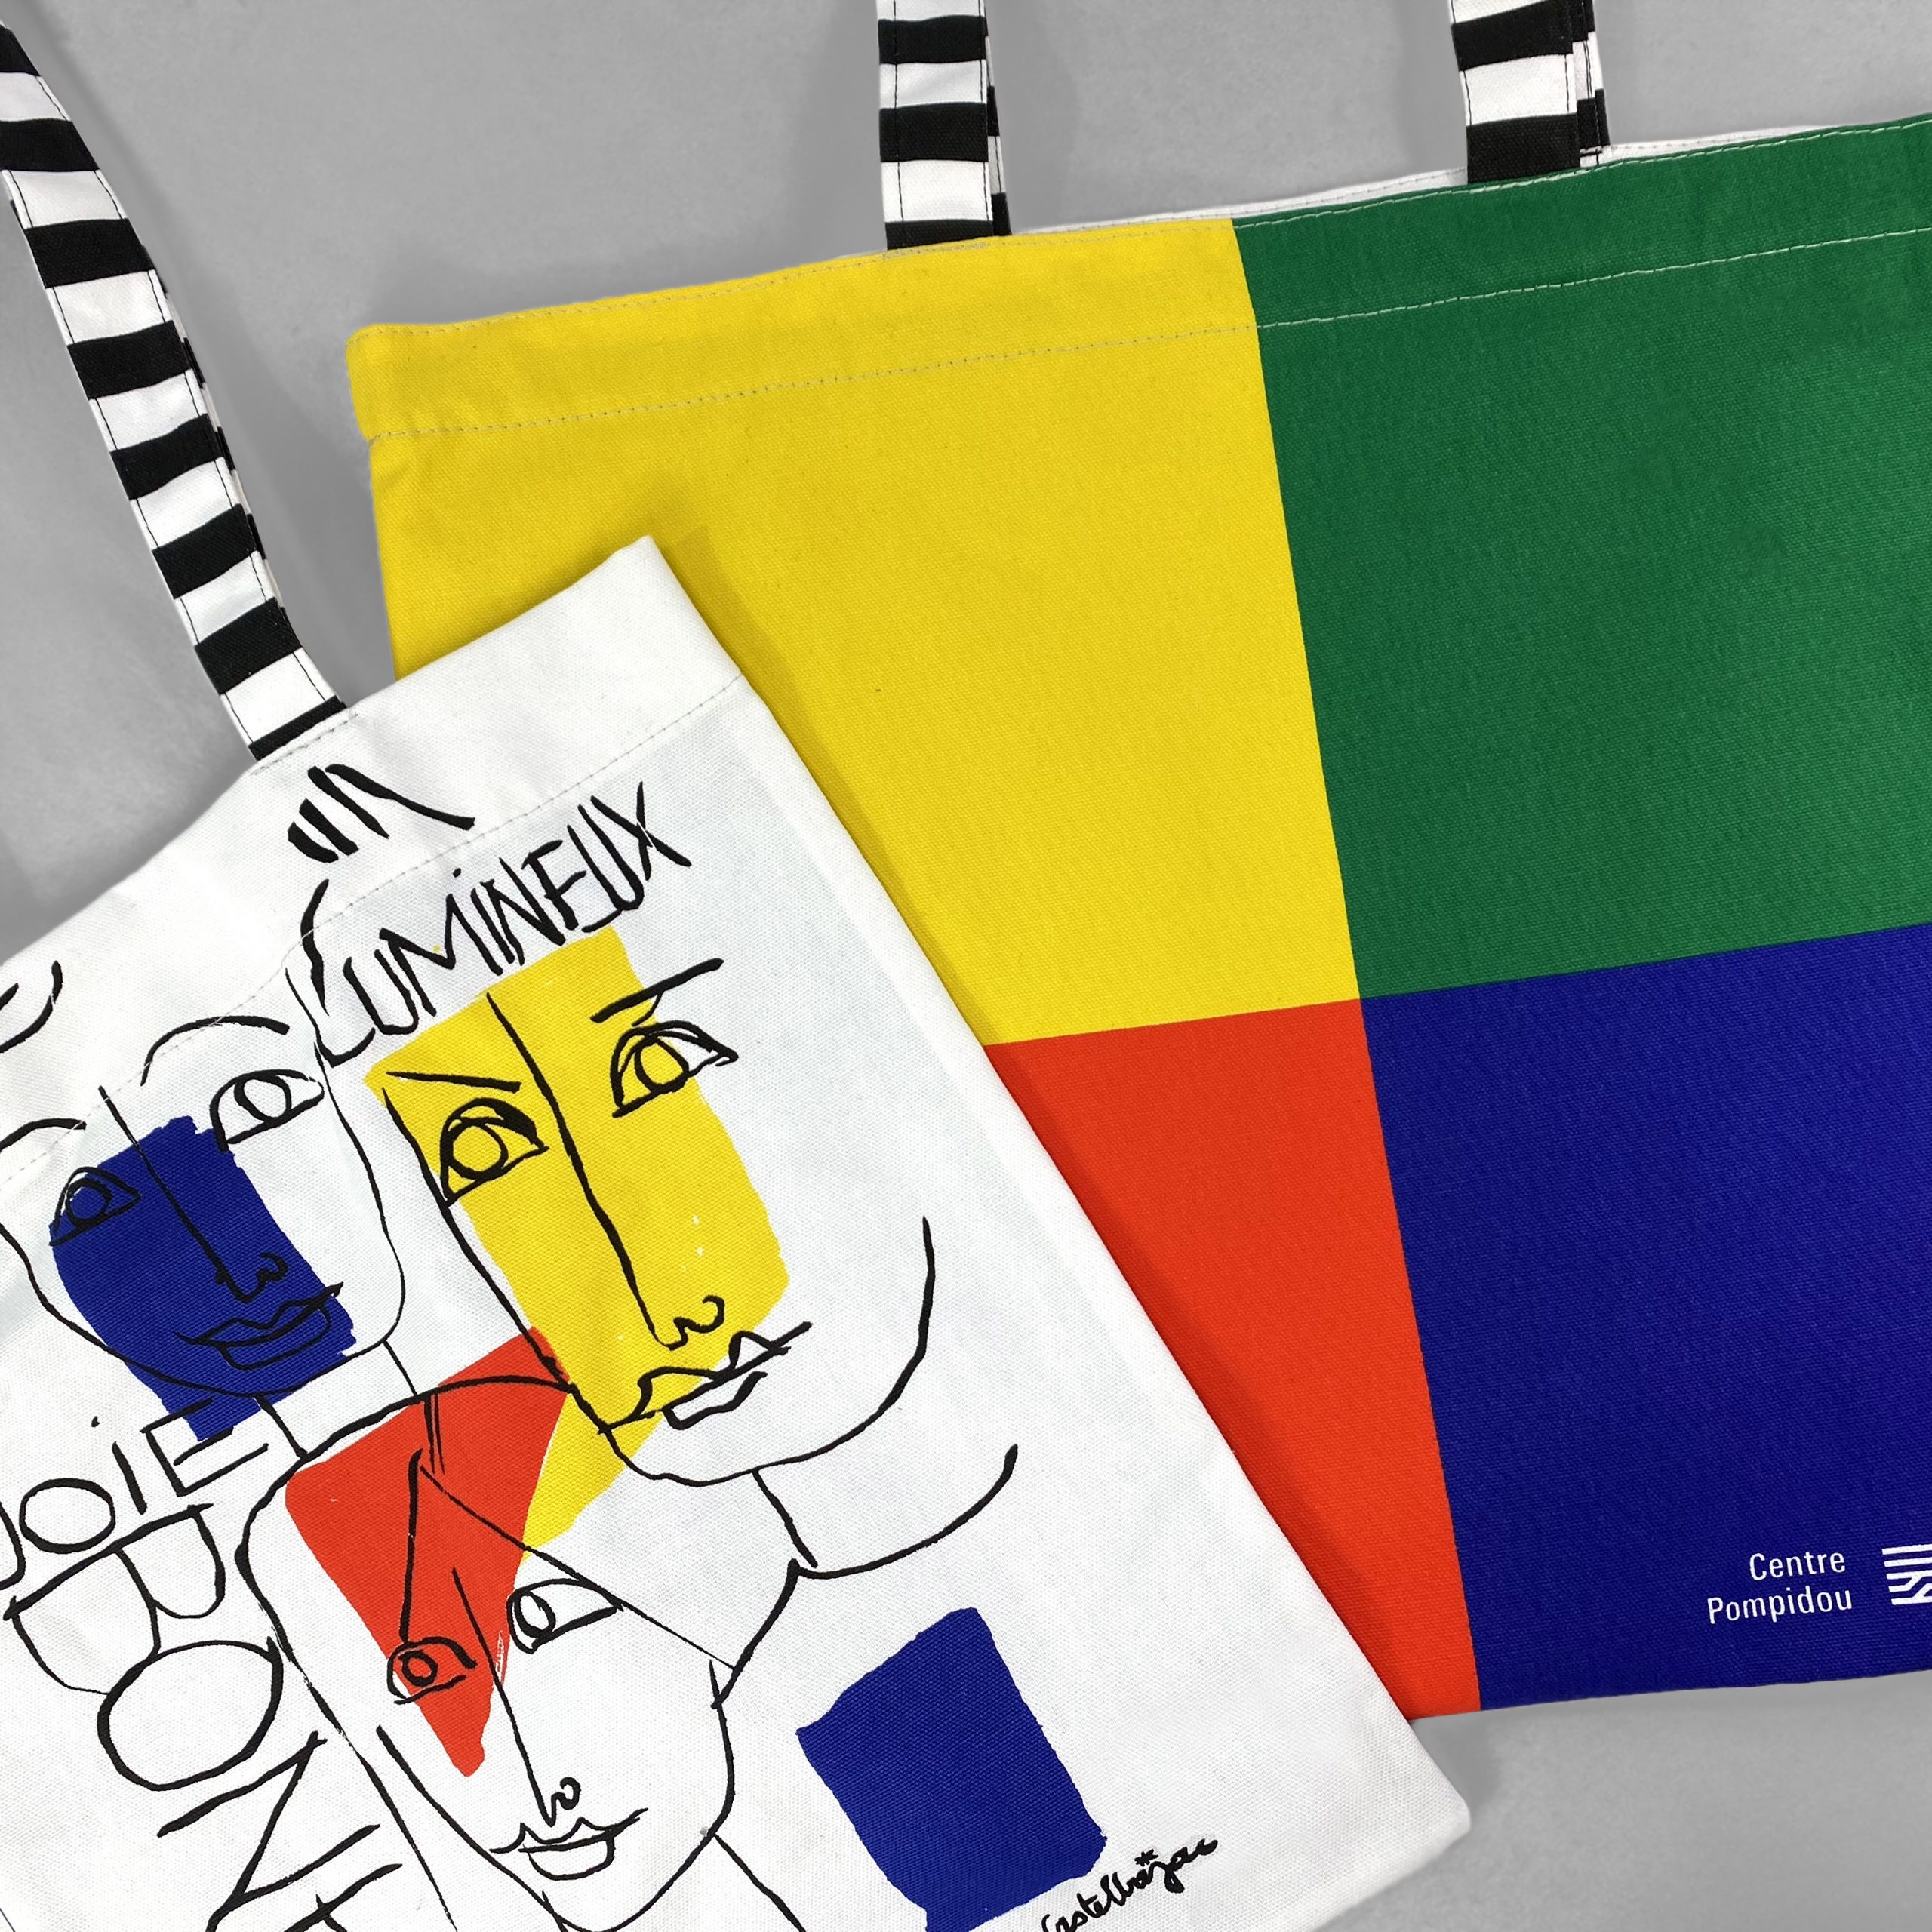 Centre Pompidou – Screen Printed Bags, Cushions & T-shirts